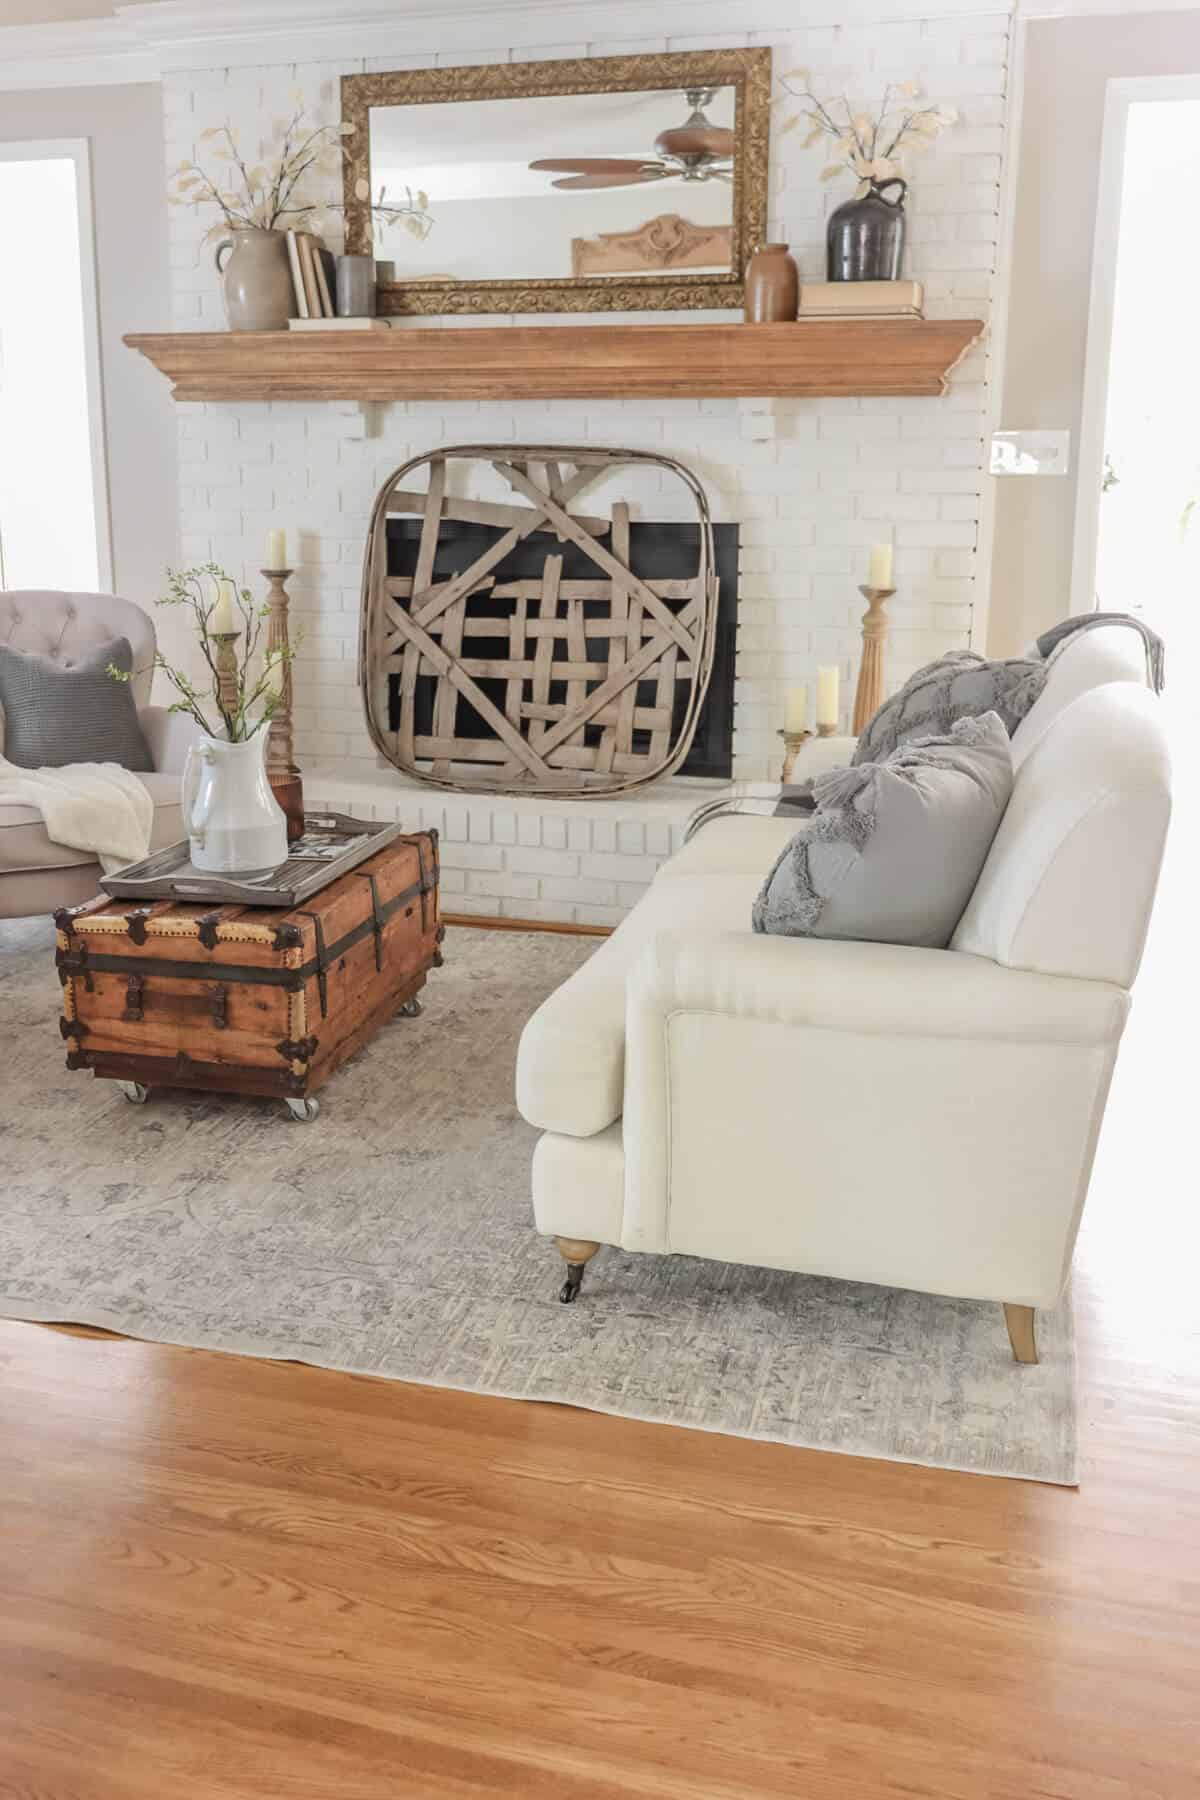 view of living room with fireplace with tobacco basket

18 Quick and Easy Tips to Refresh Your Living Room